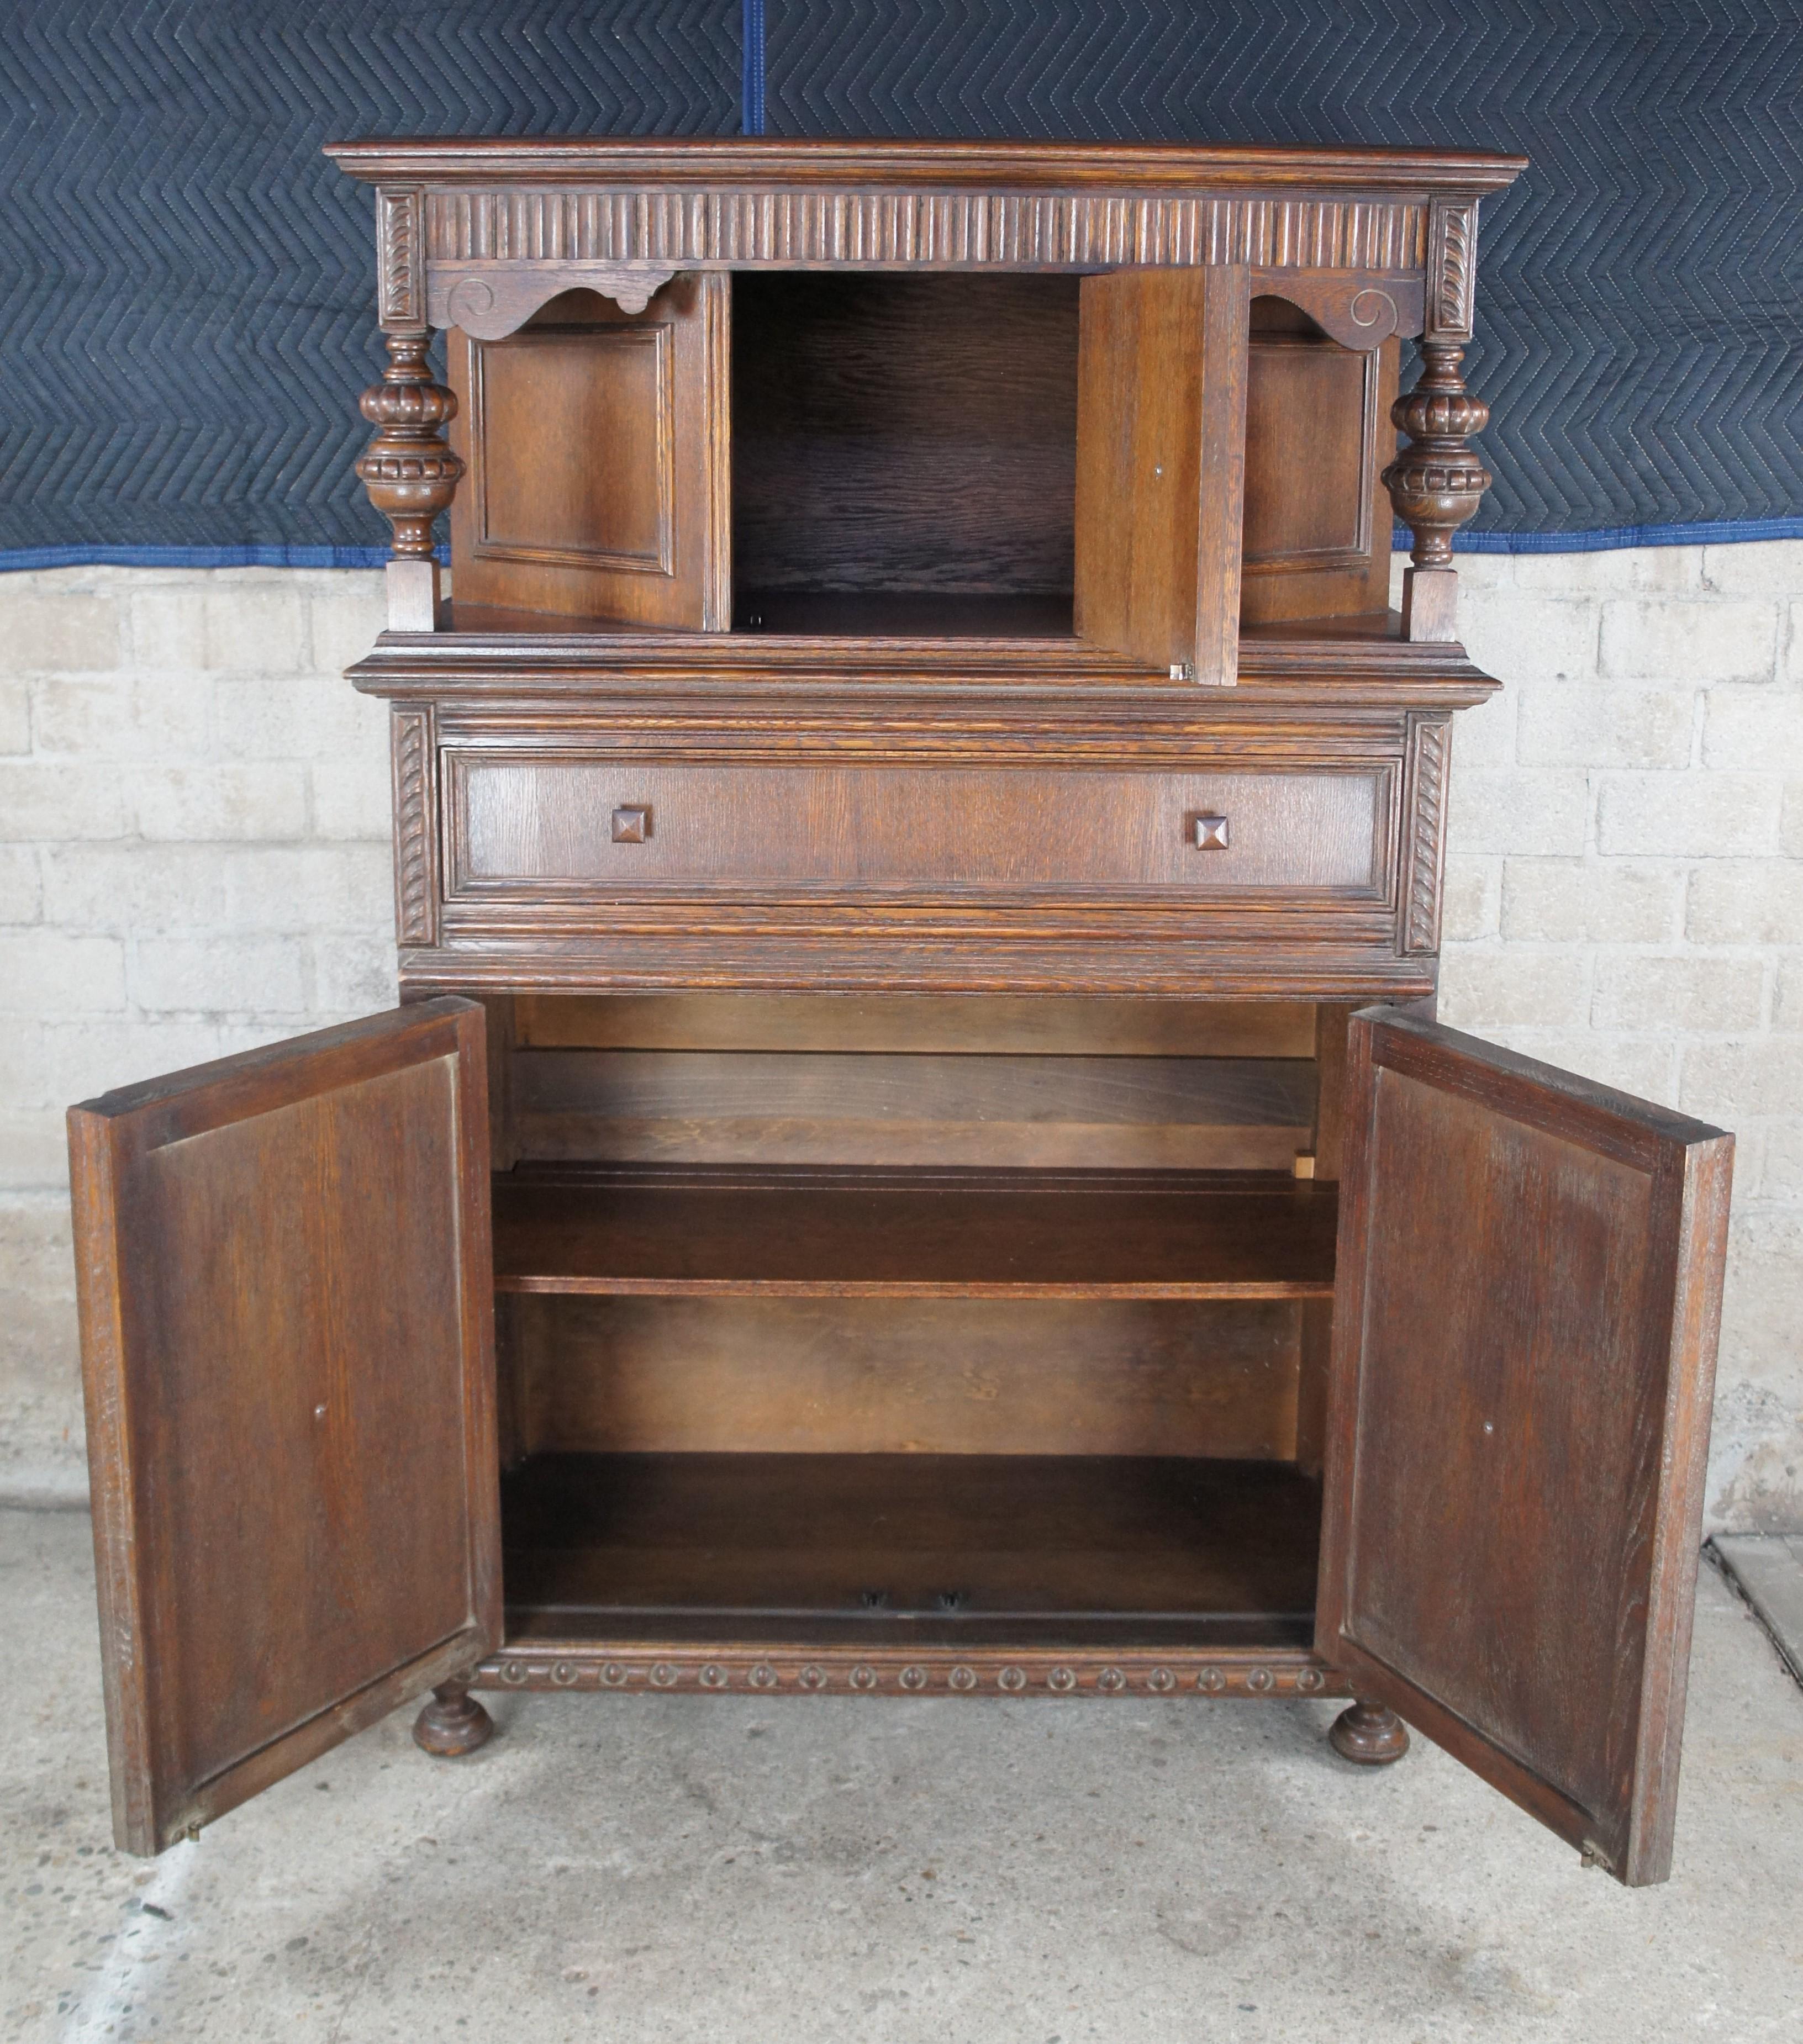 Antique English Jacobean Style Carved Oak Court Cupboard Hutch Sideboard Dry Bar In Good Condition For Sale In Dayton, OH